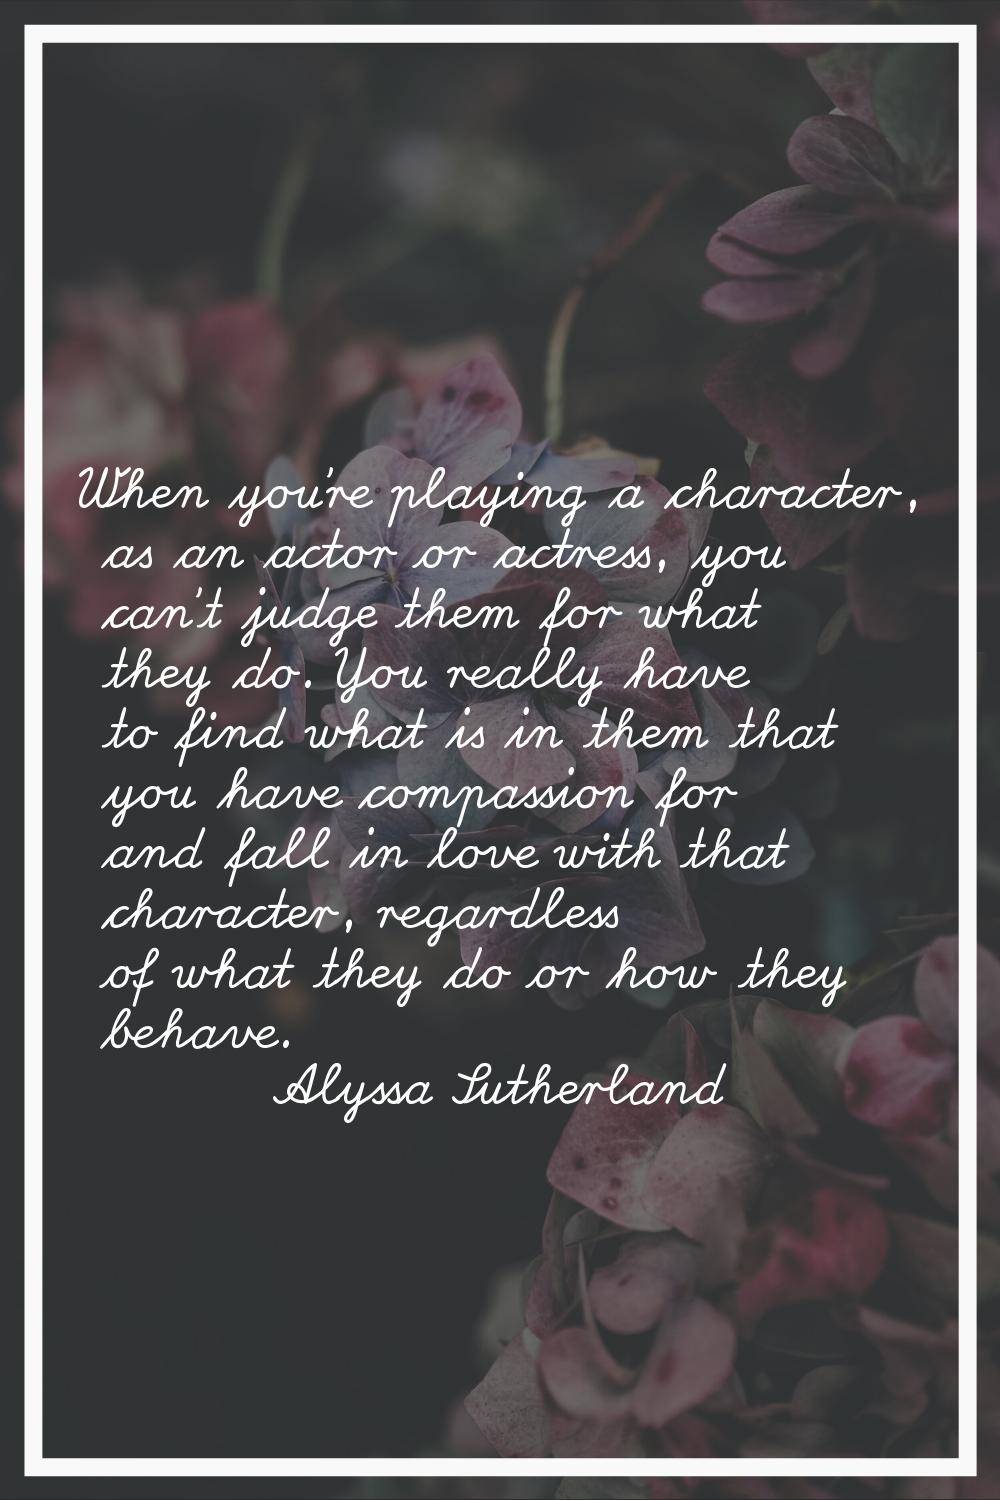 When you're playing a character, as an actor or actress, you can't judge them for what they do. You